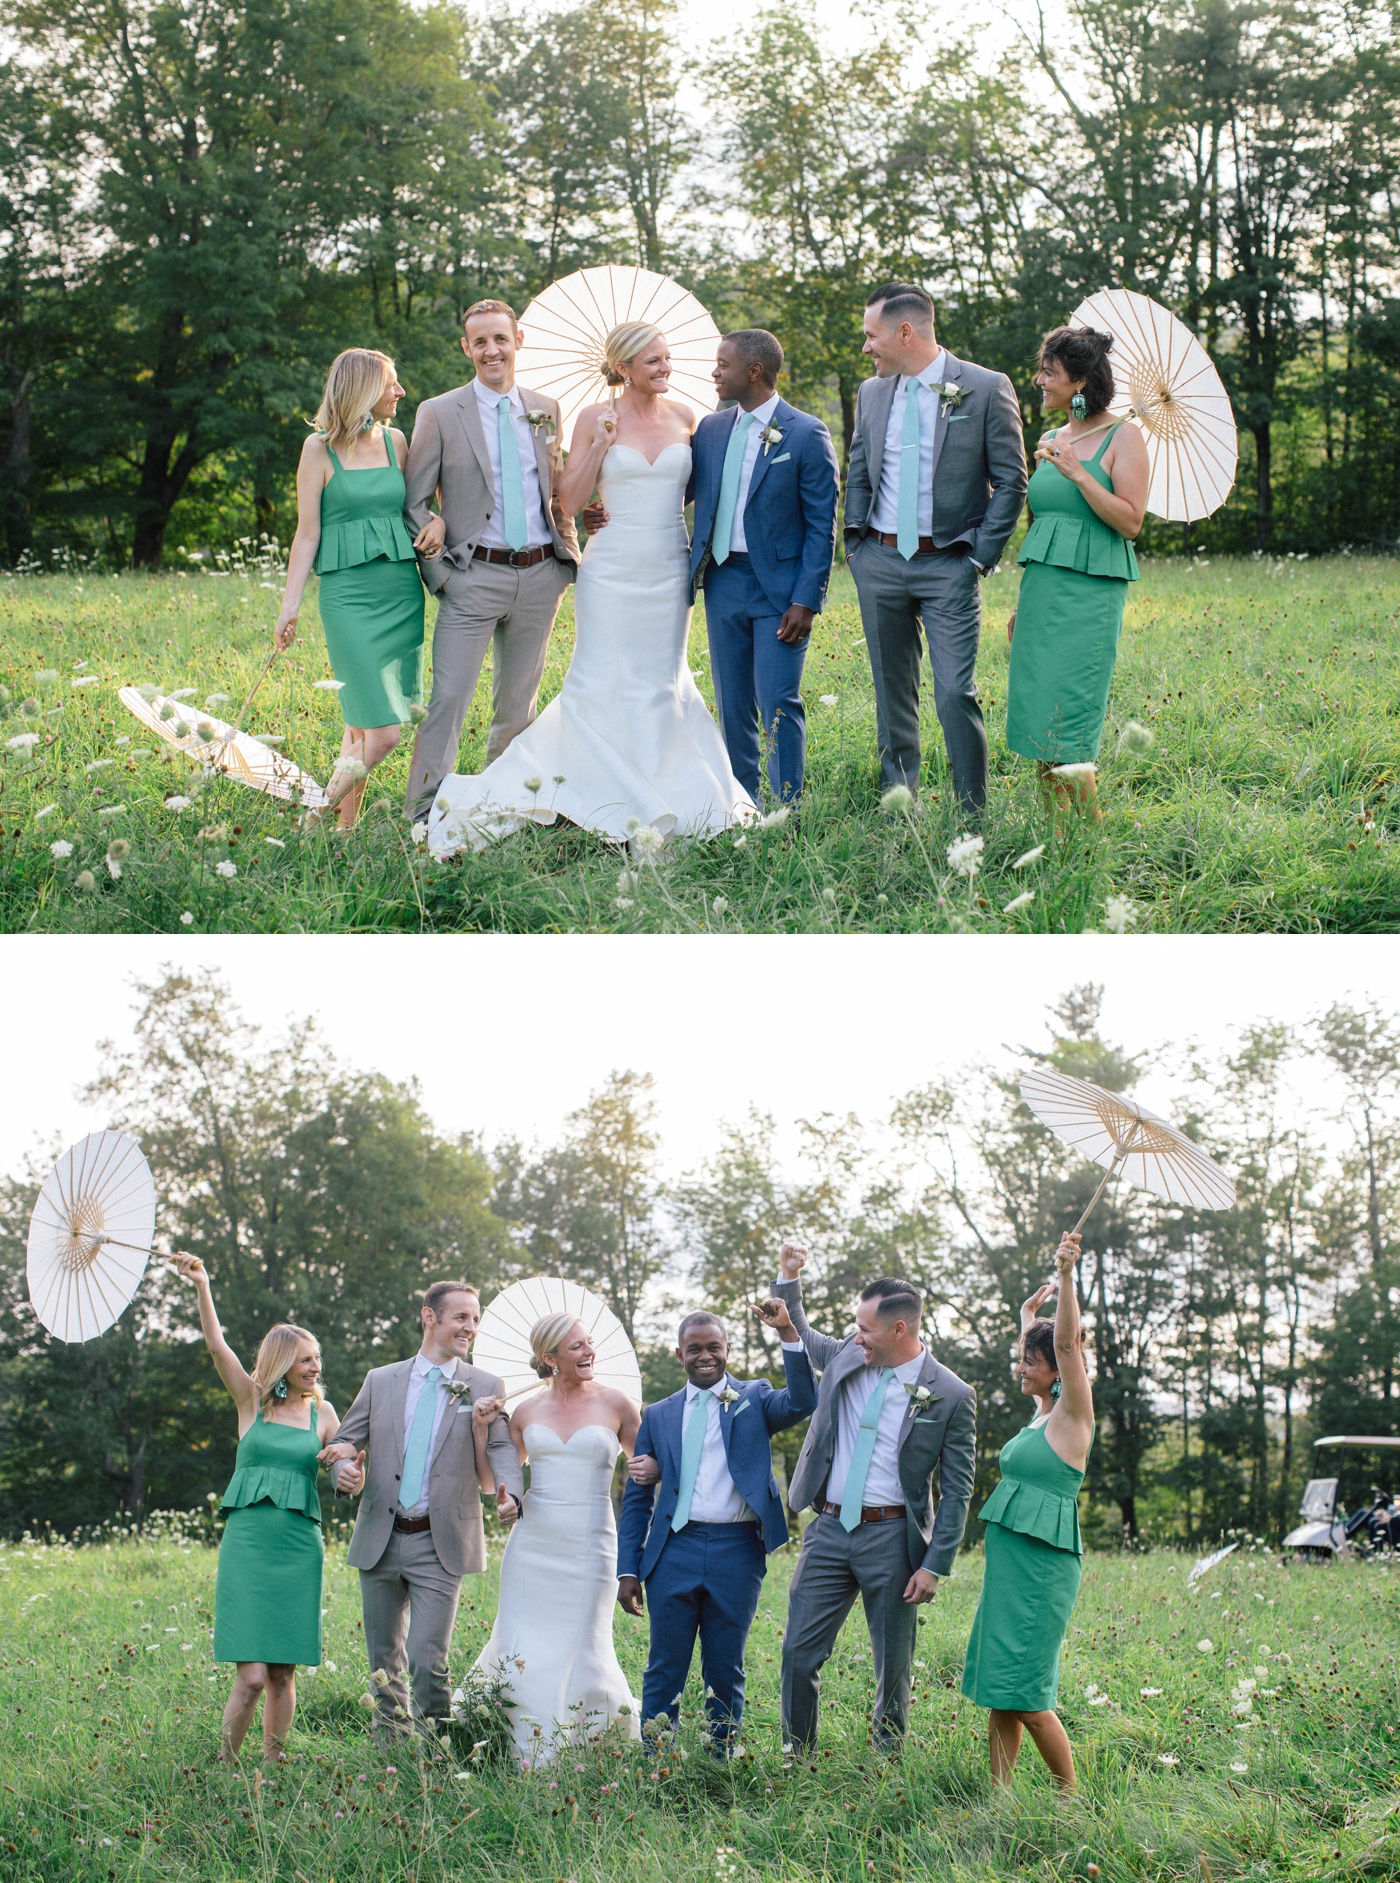 Bridal party portraits on a family farm in New Hampshire